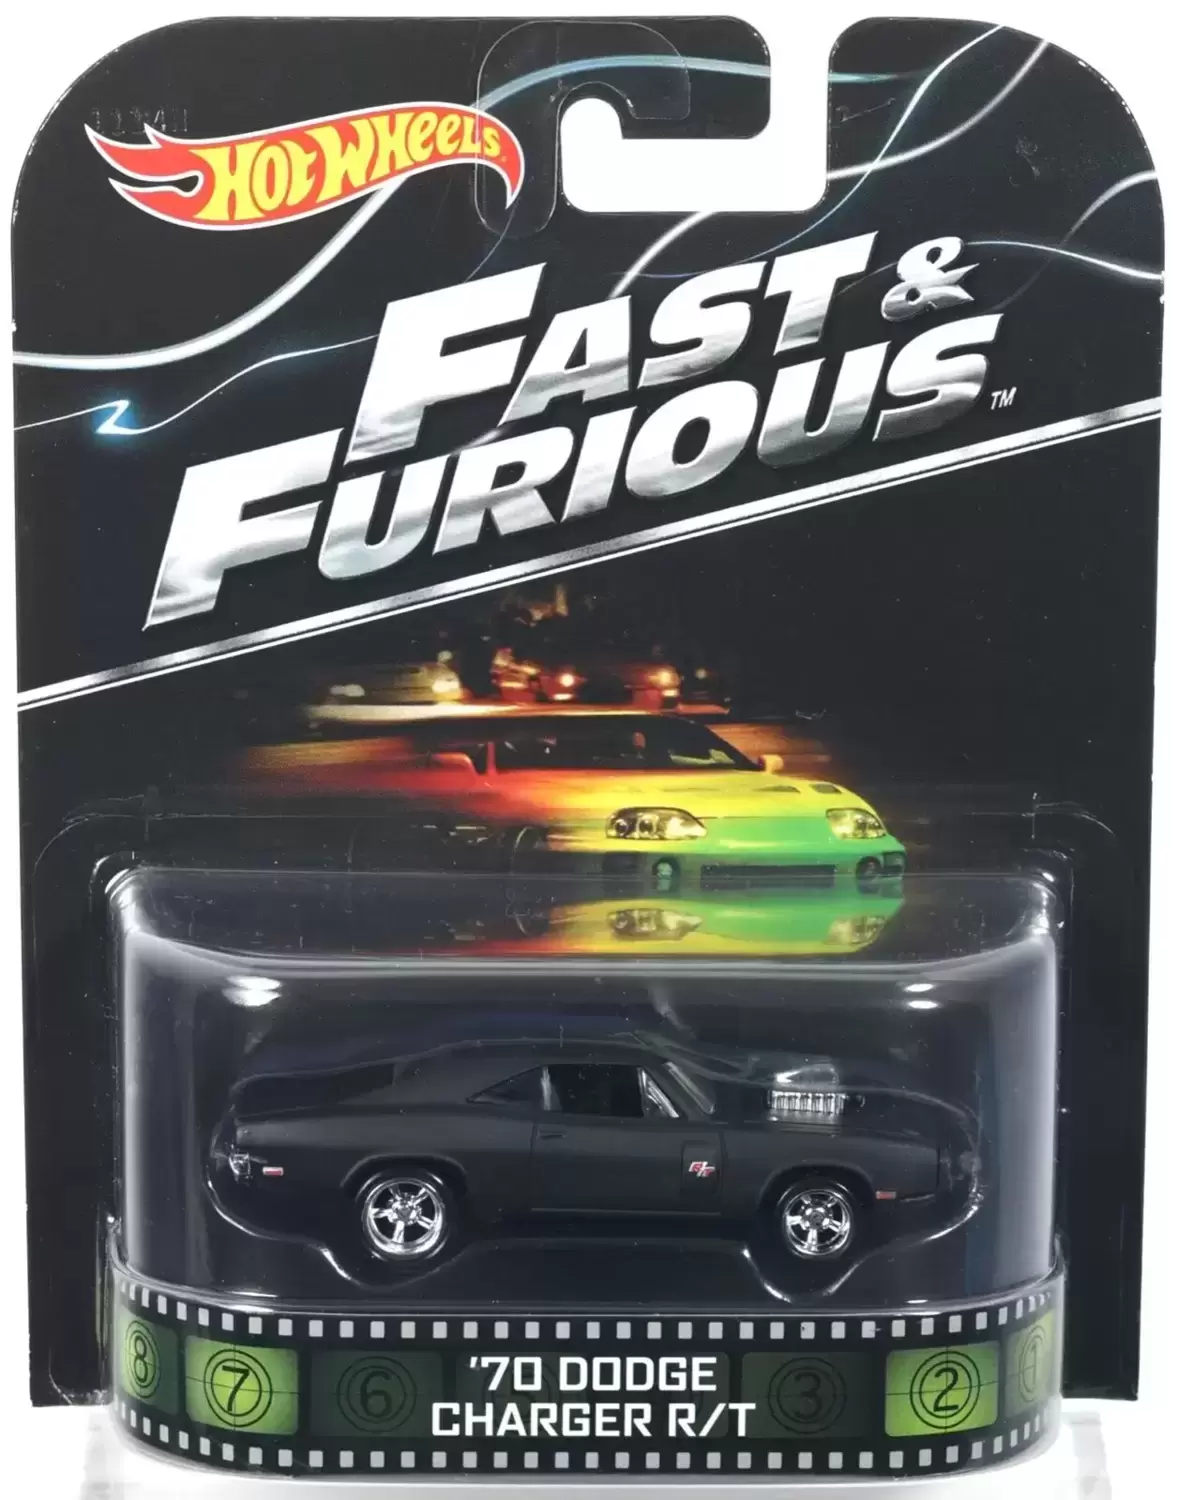 Fast & Furious - 70 Dodge Charger R/T - Retro Entertainment Hot